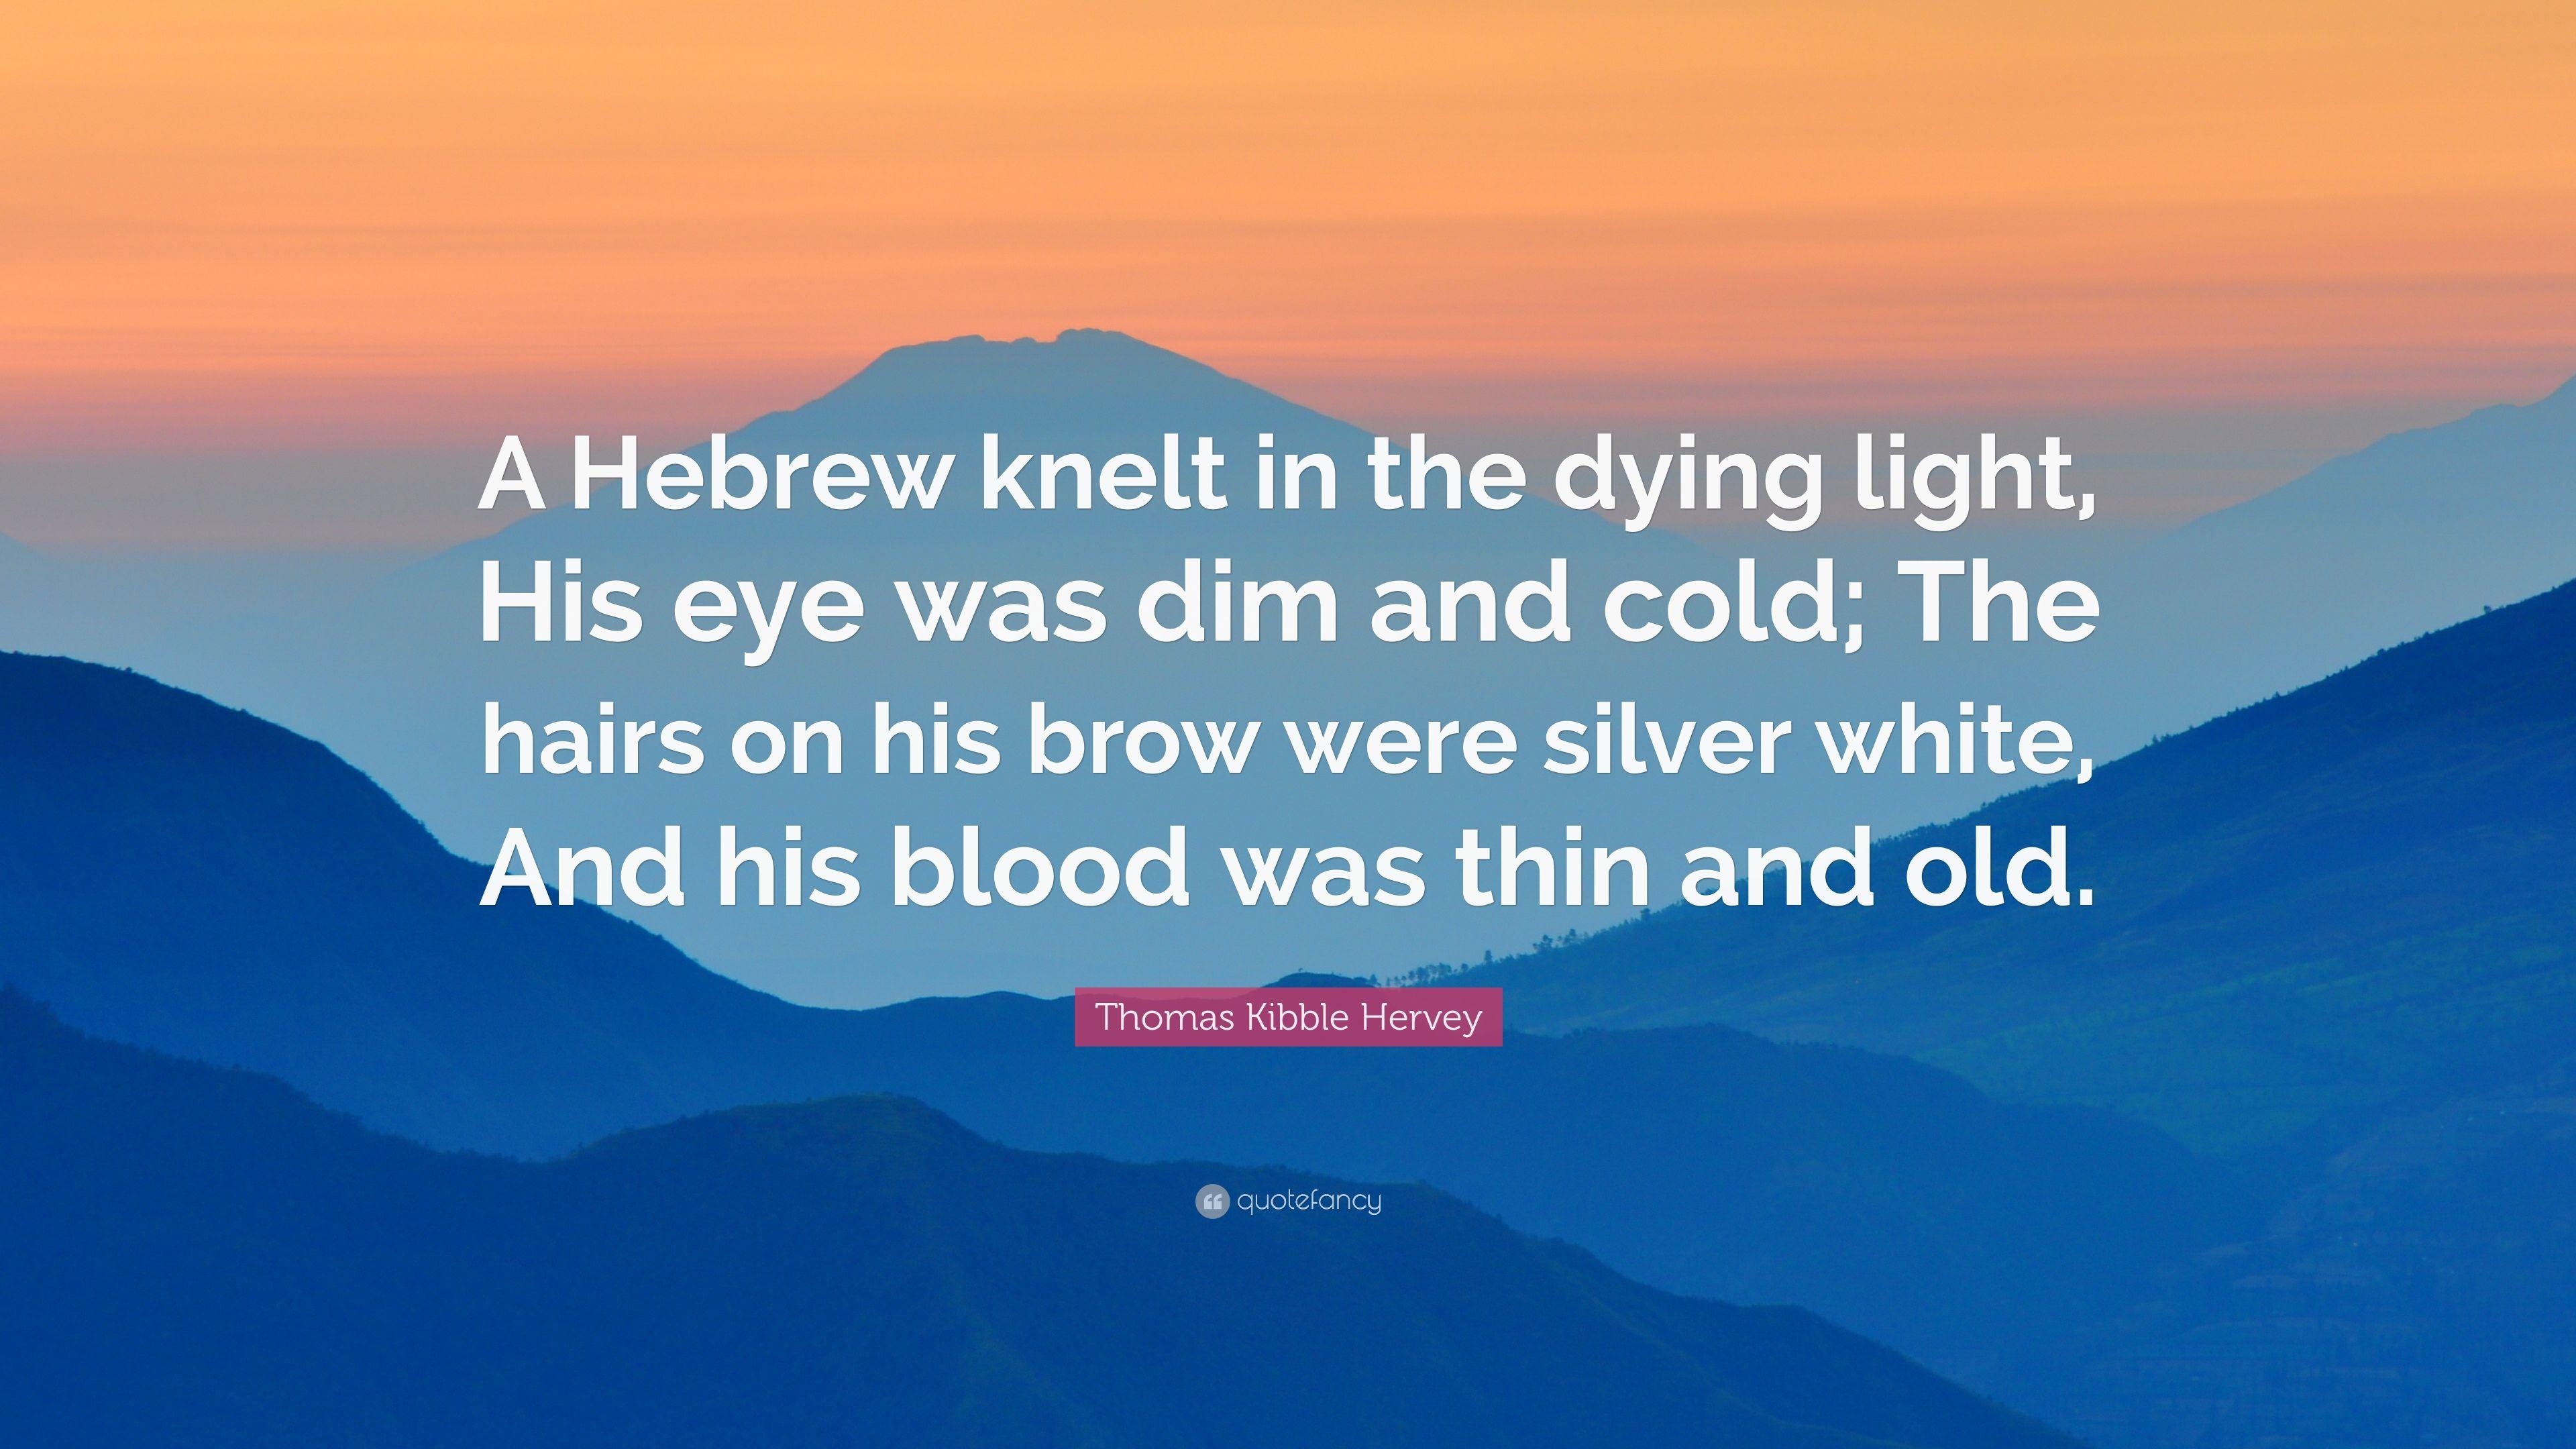 Thomas Kibble Hervey Quote: “A Hebrew knelt in the dying light